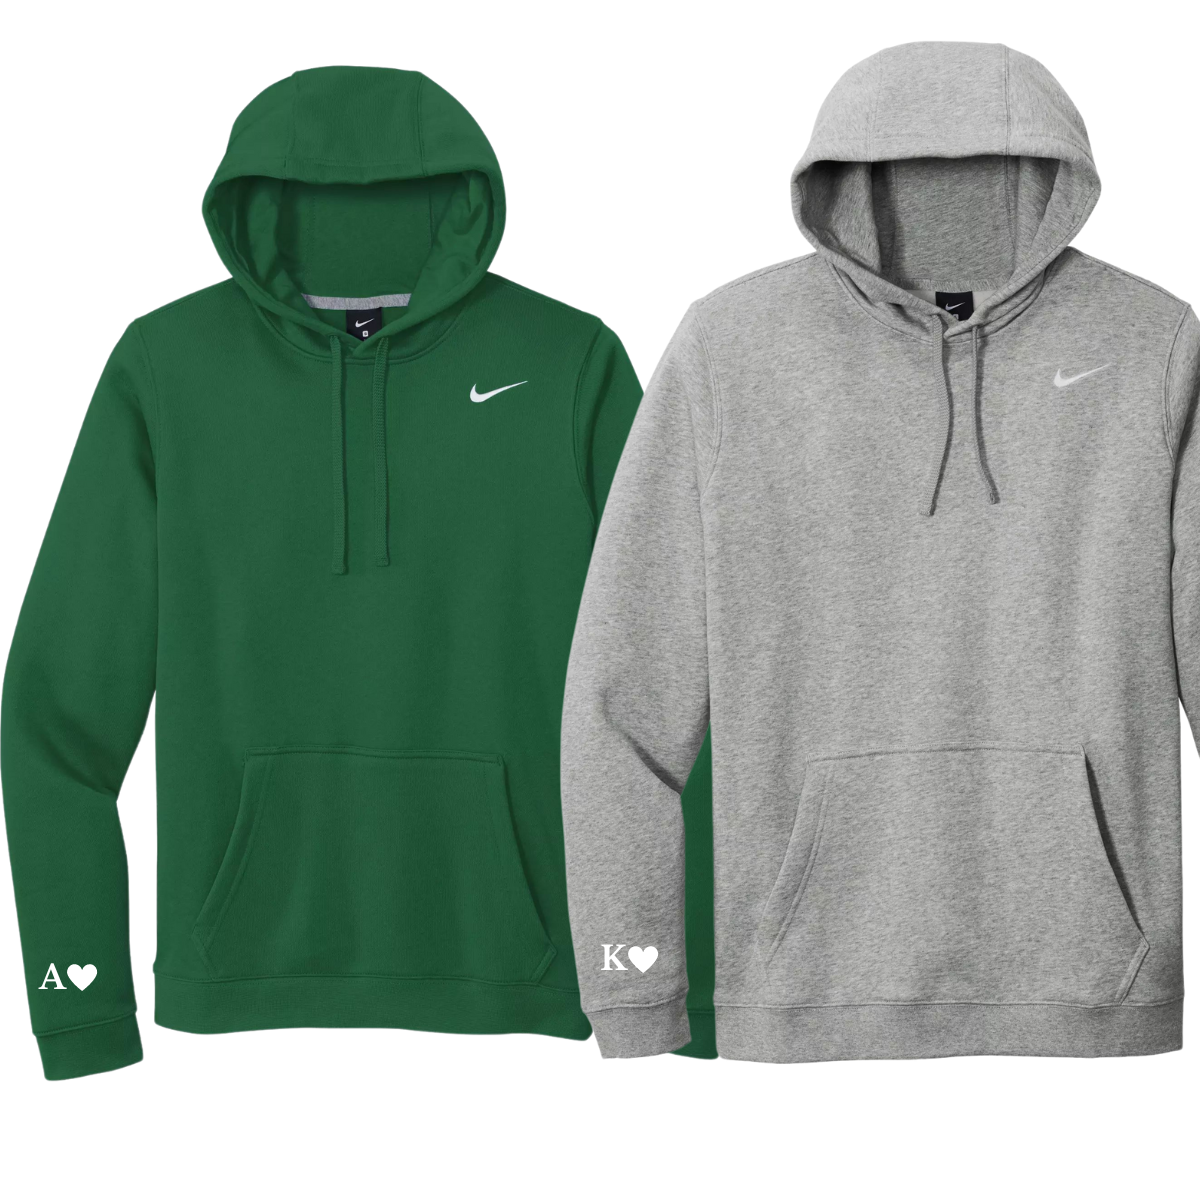 Nike Embroidered hoodie "Initials only on sleeve" couple's sweatshirt, Anniversary gift, Birthday gift